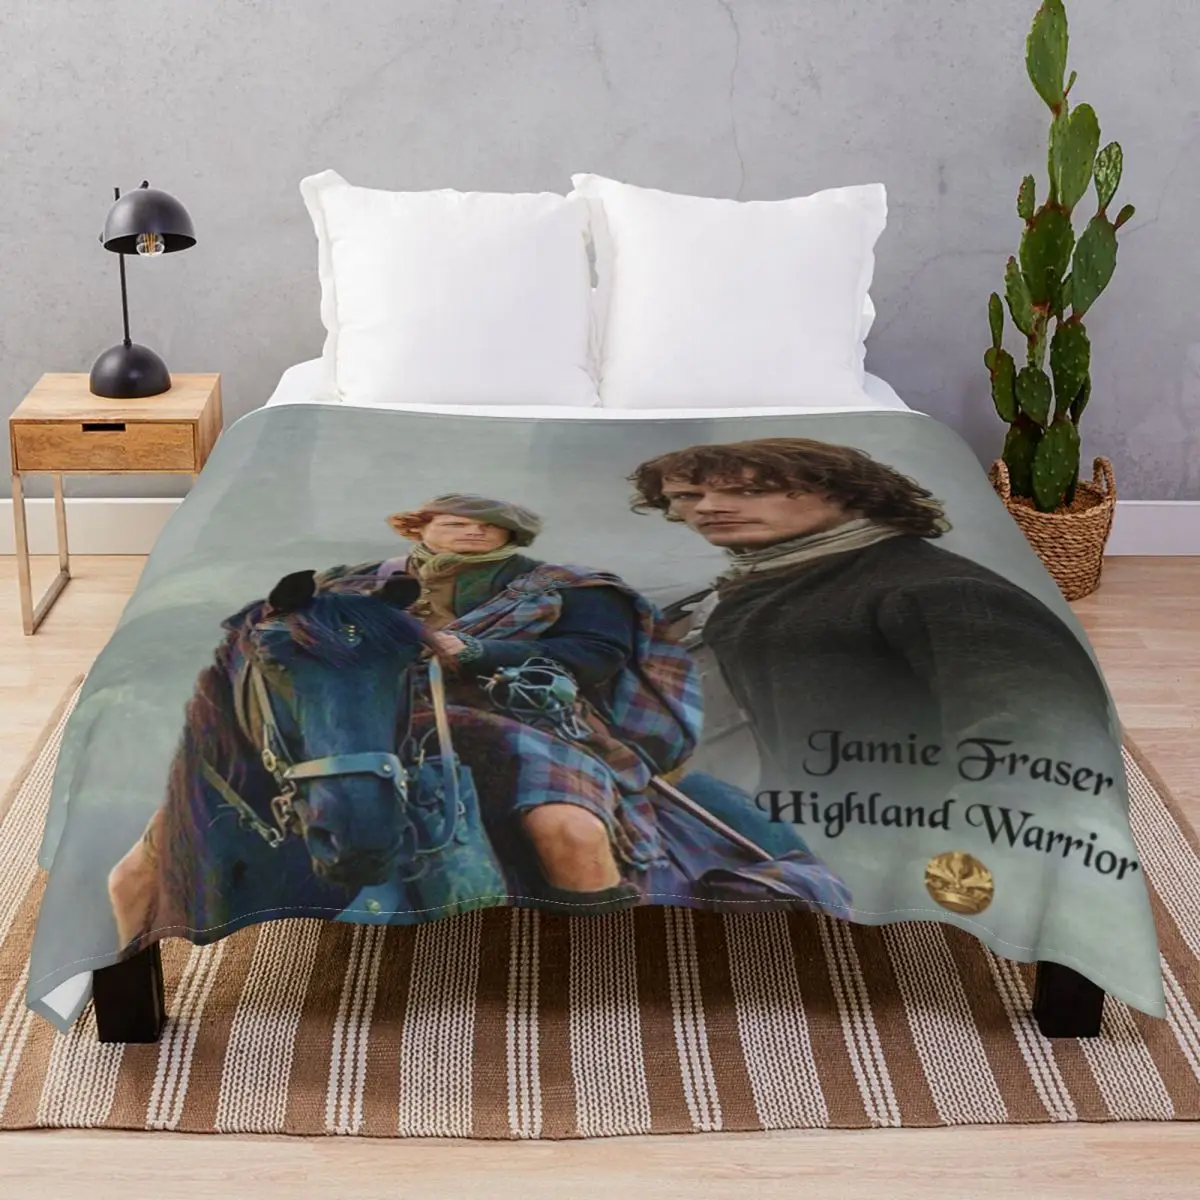 Jamie Fraser Highland Warrior Blankets Flannel Plush Print Breathable Throw Blanket for Bed Home Couch Travel Office